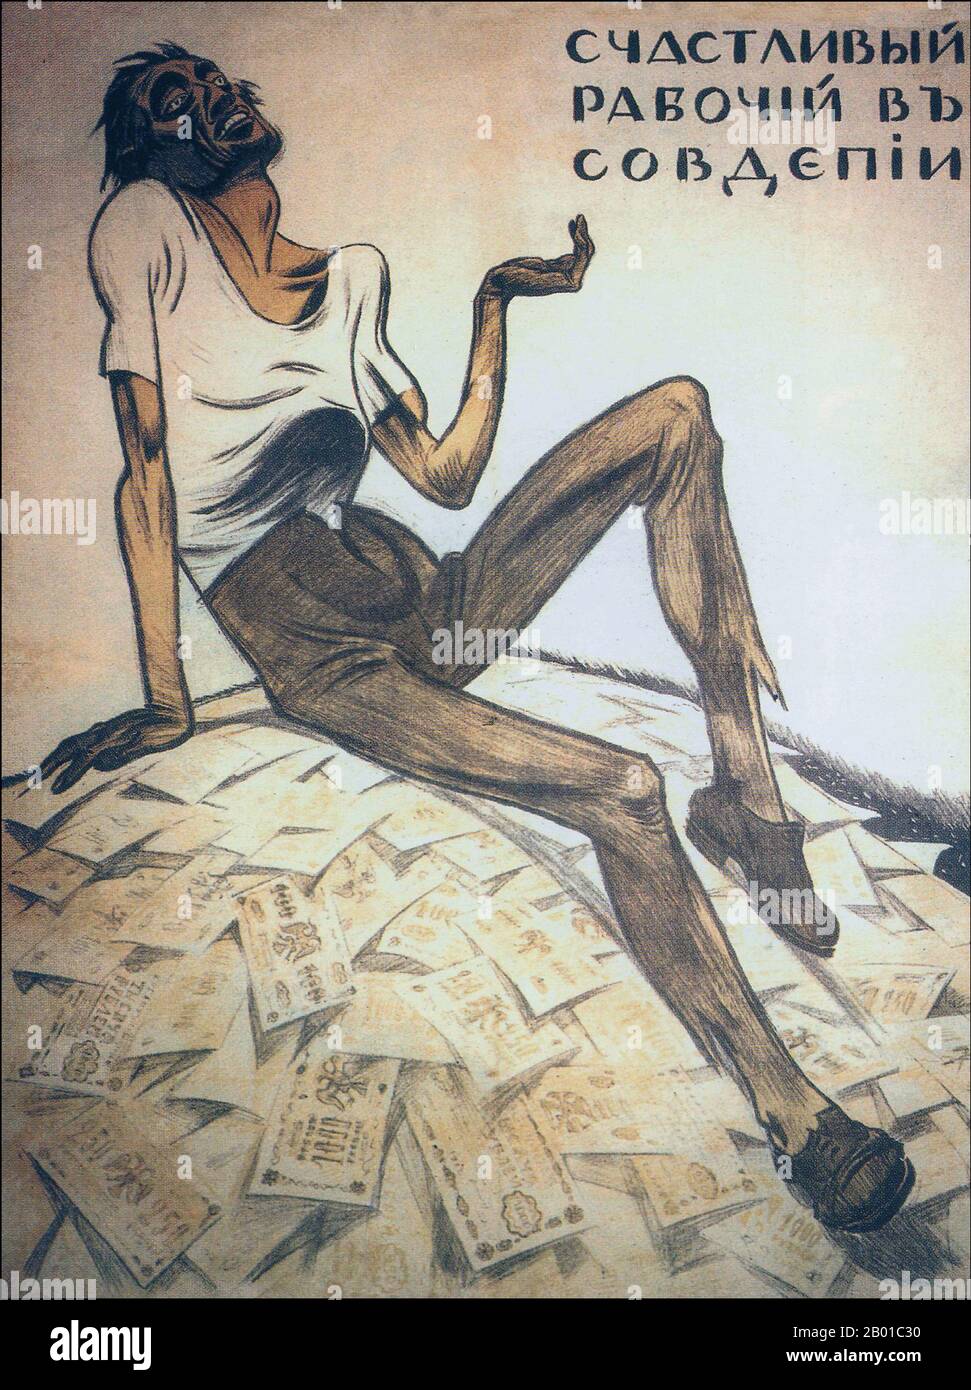 Russia: White Russian poster depicting a Soviet beggar sitting on a pile of worthless currency, 1919.  'A Happy Worker in Sovdepia' (a derogatory name for the Soviet state). A White Russian paper poster published in Odessa, satirising hyperinflation in Soviet-held territories (the worker is shown begging while sitting on a heap of devalued and worthless banknotes). Stock Photo